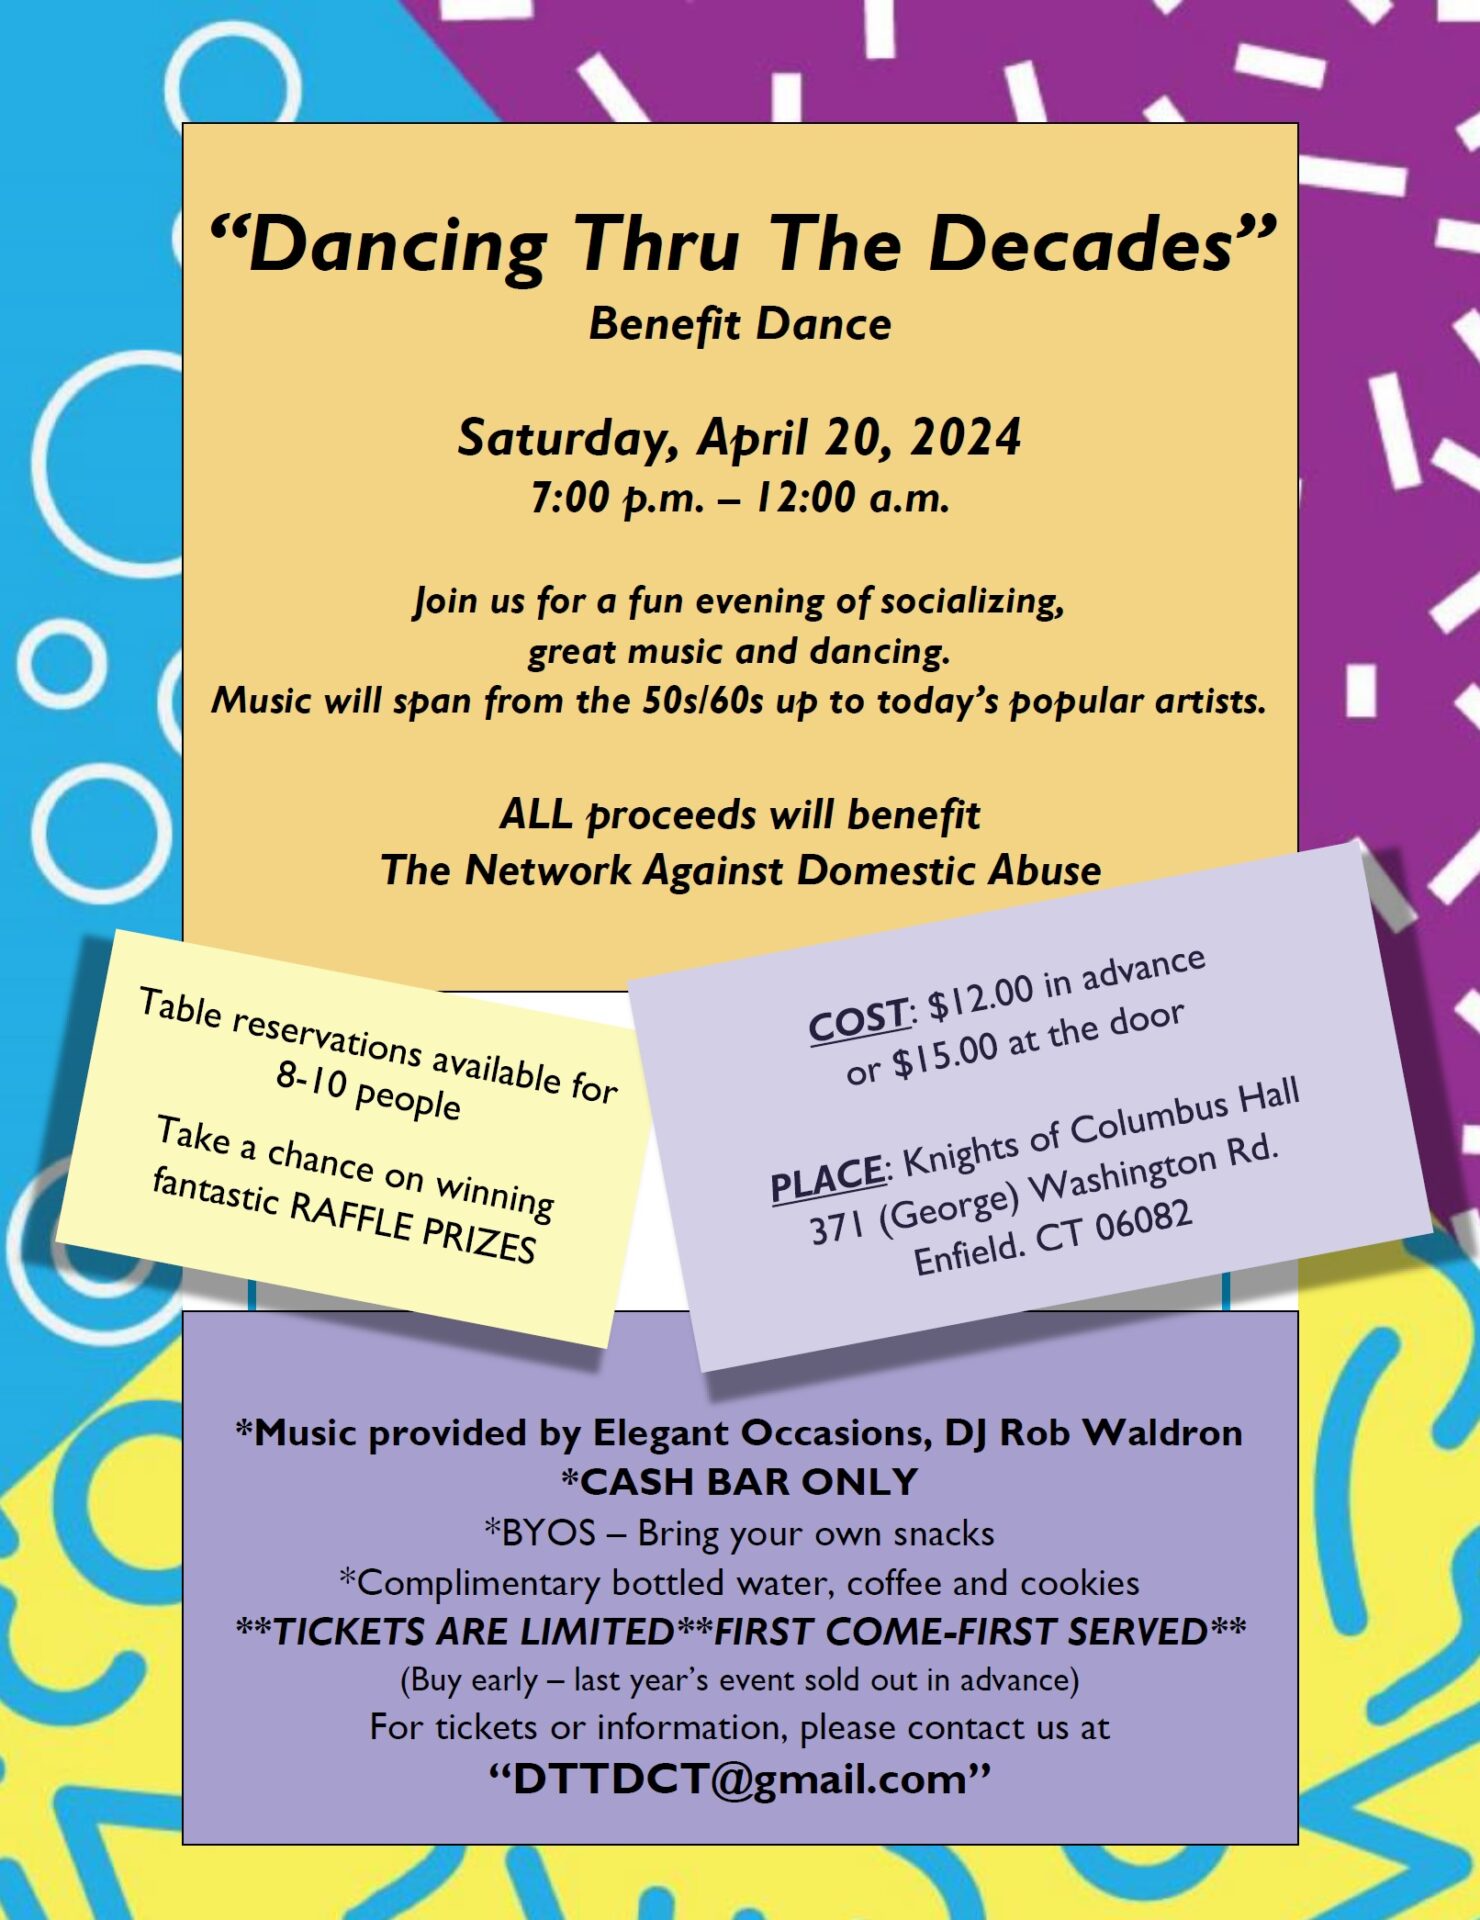 "Dancing Through the Decades" @ Knights of Columbus Hall